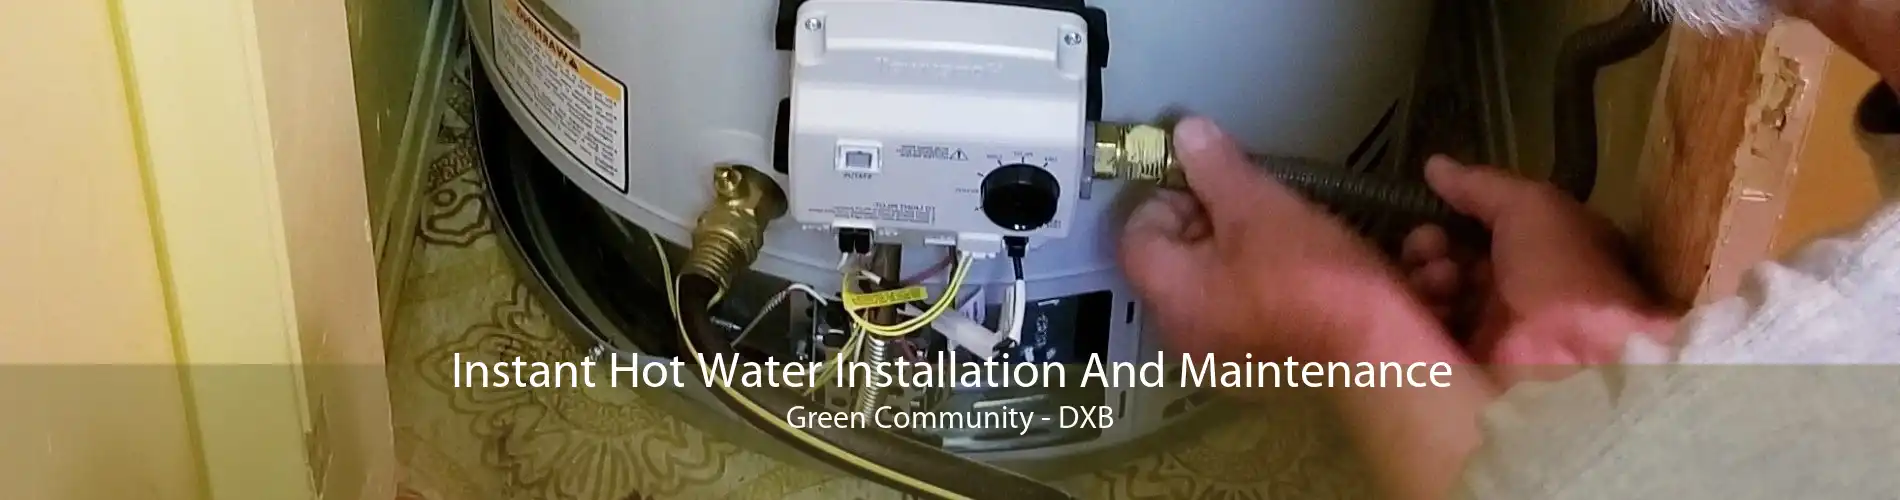 Instant Hot Water Installation And Maintenance Green Community - DXB